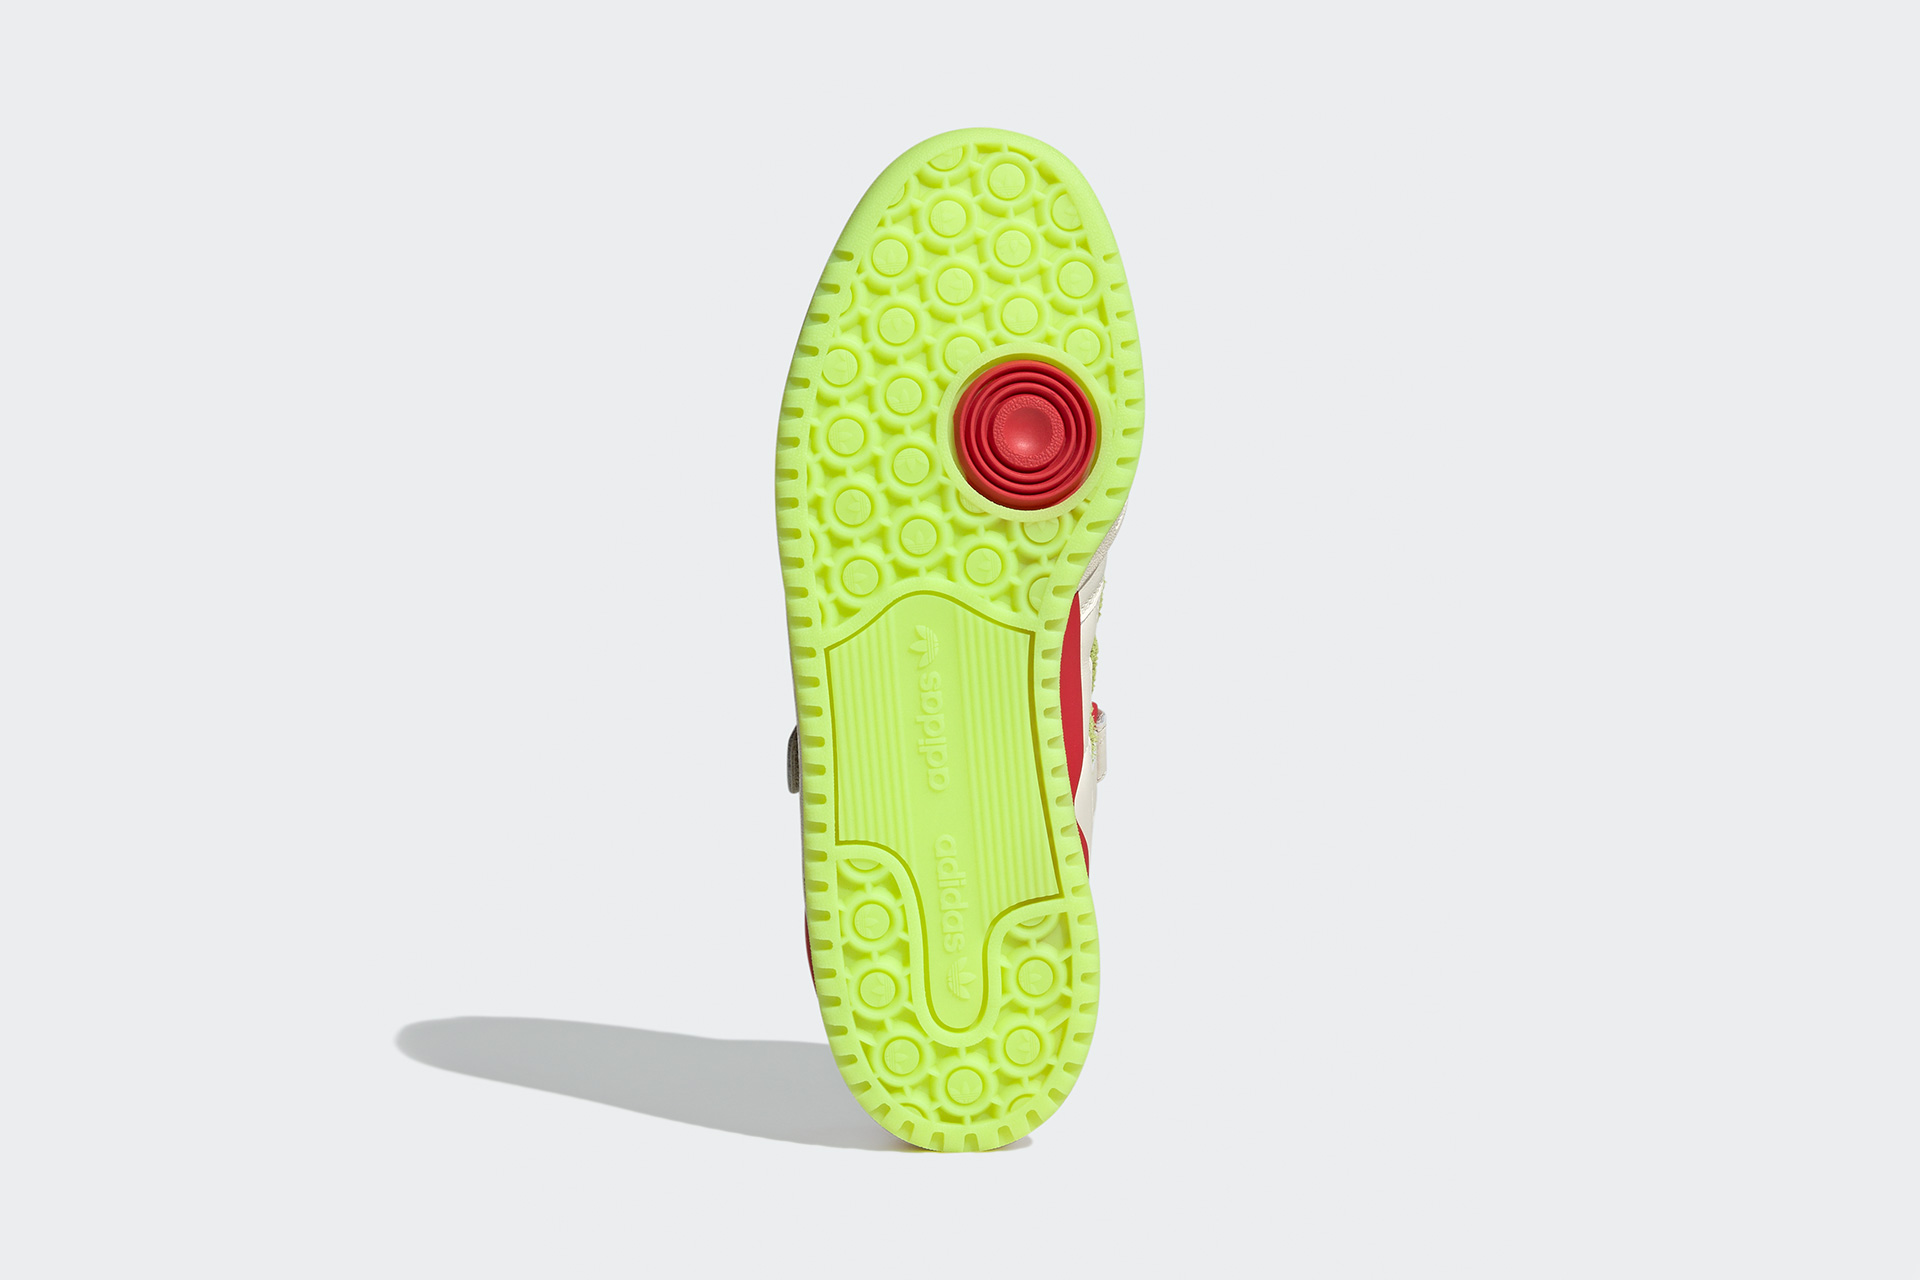 adidas Forum Low The Grinch